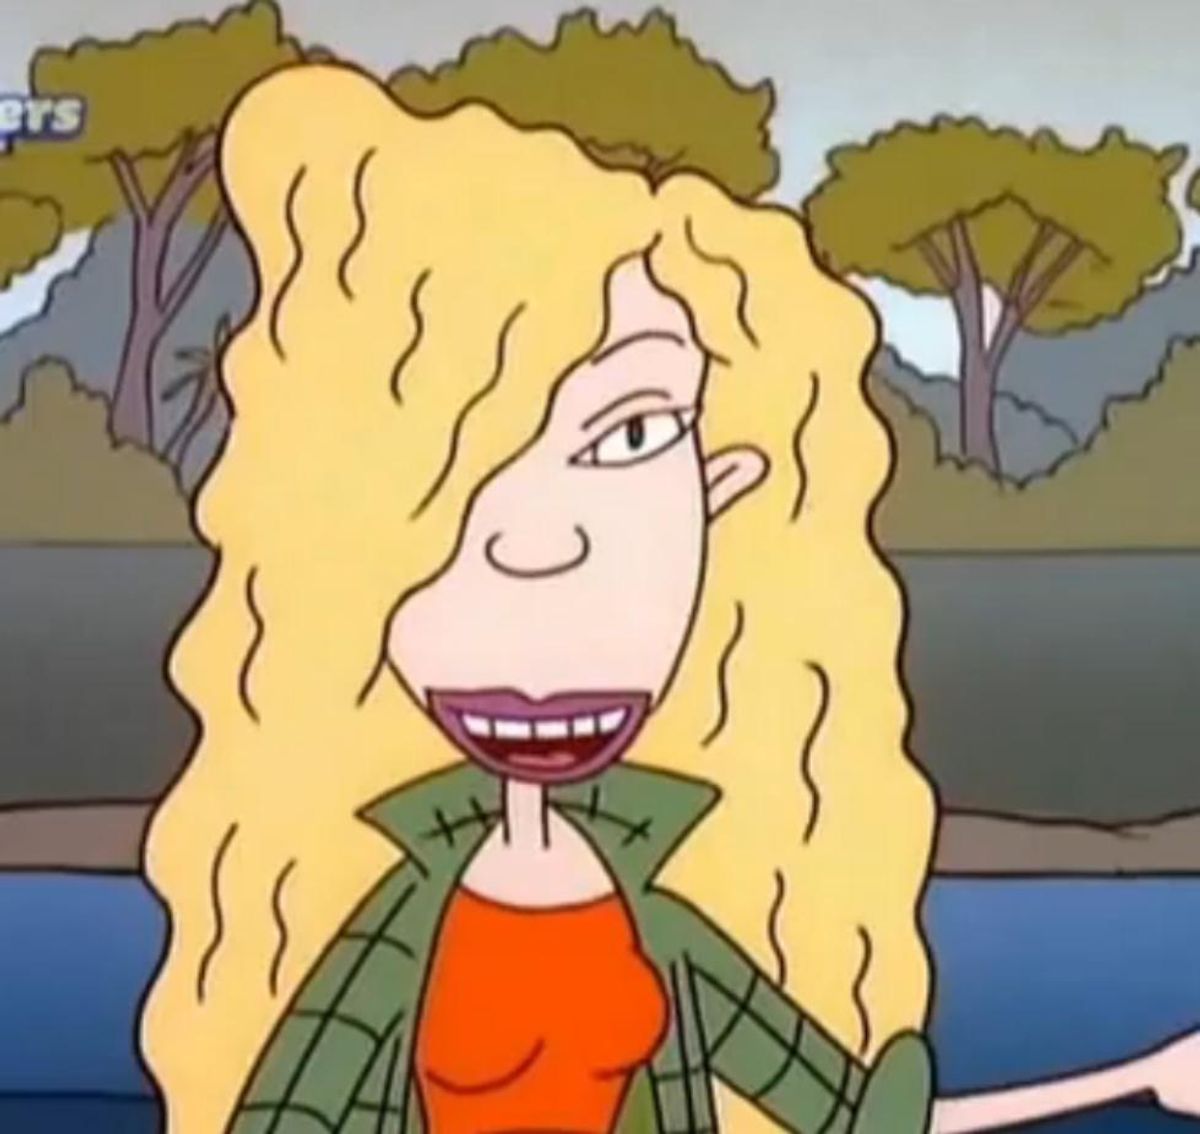 The Last Week Of Classes: As Told By Debbie From The Wild Thornberrys